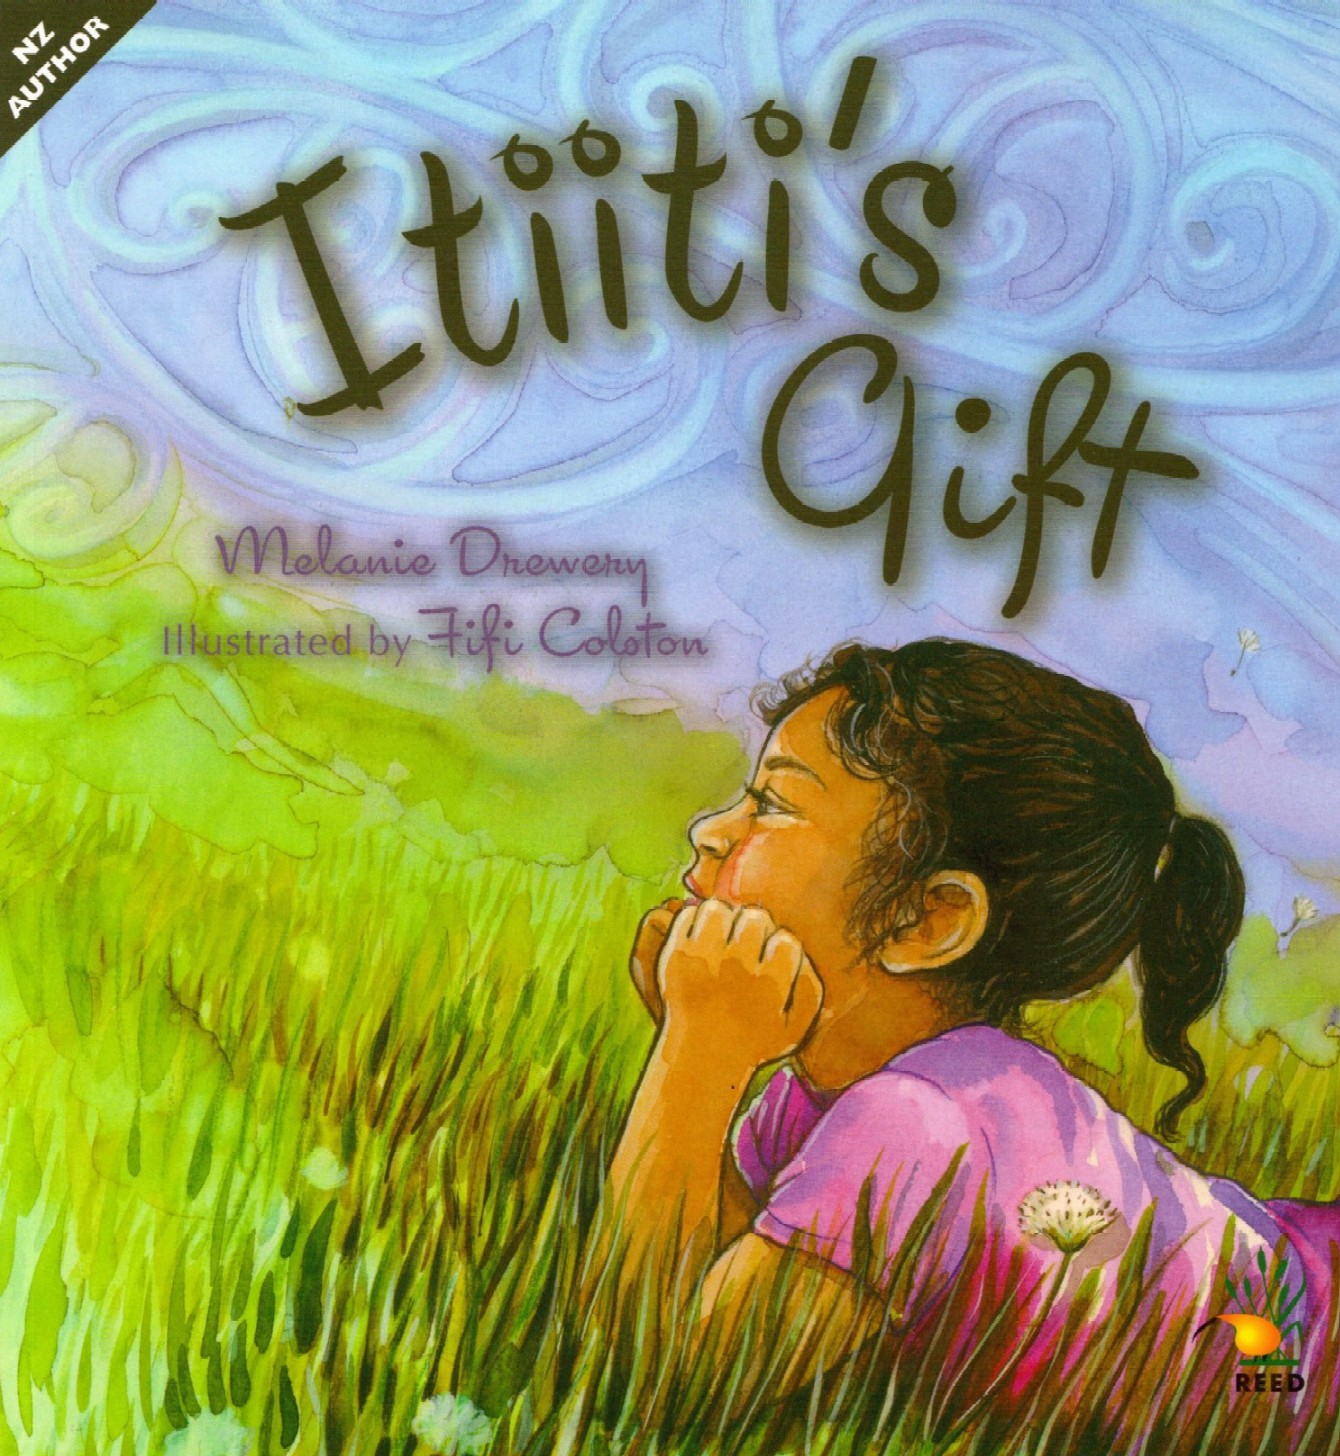 Itiiti’s Gift: Image of the cover of the book “Itiiti’s Gift”.